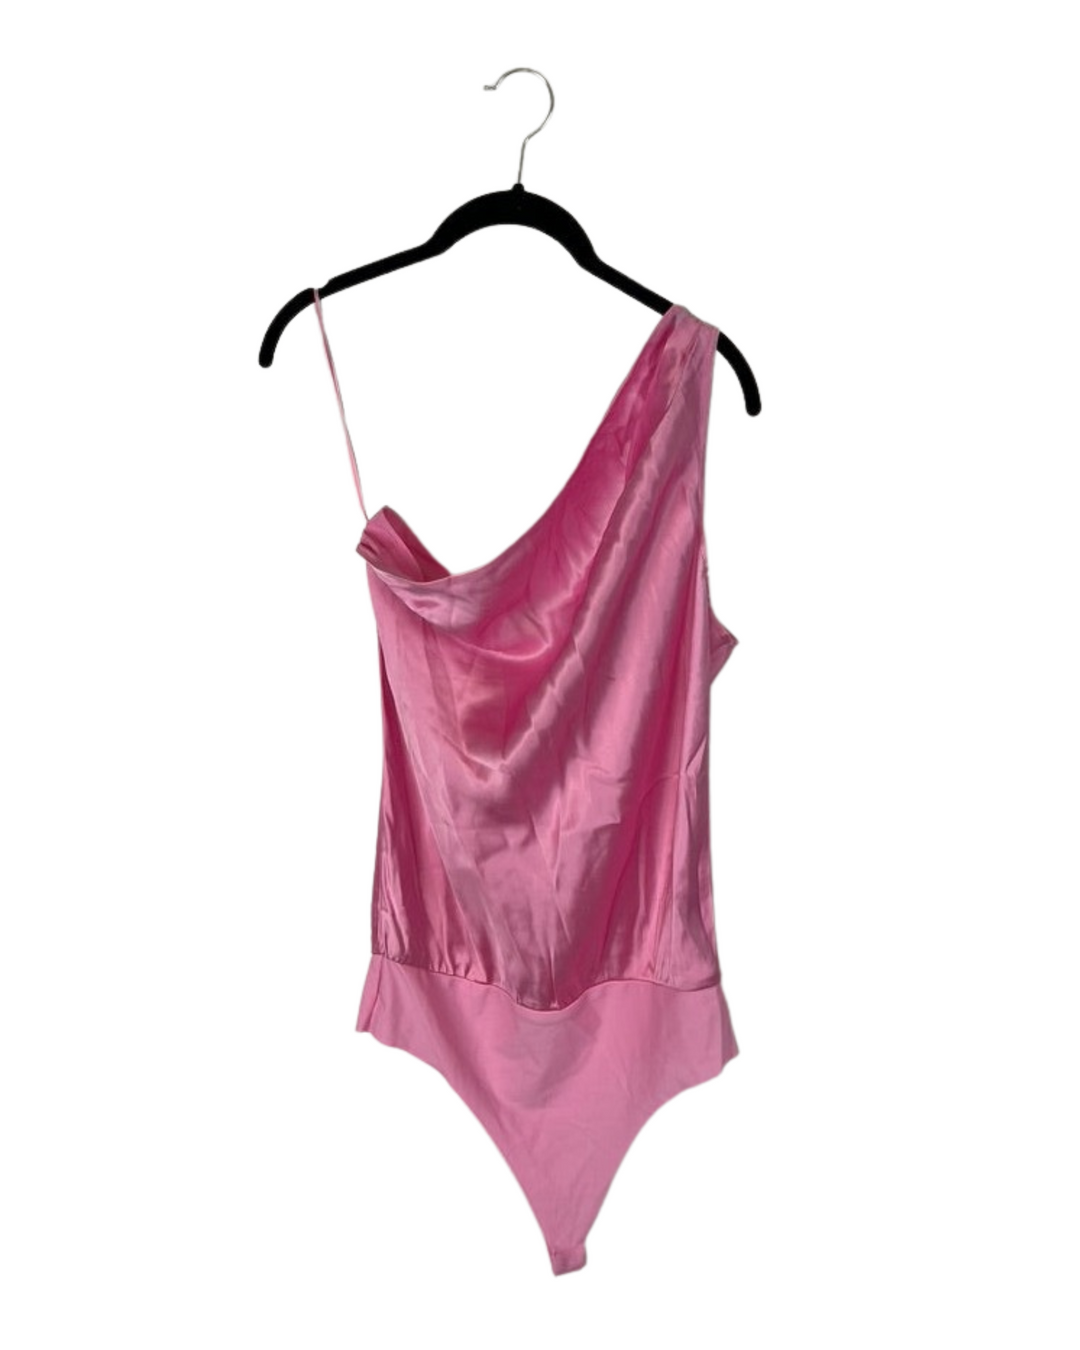 Bright Pink One Shoulder Body Suit - Small, Medium and Extra Large